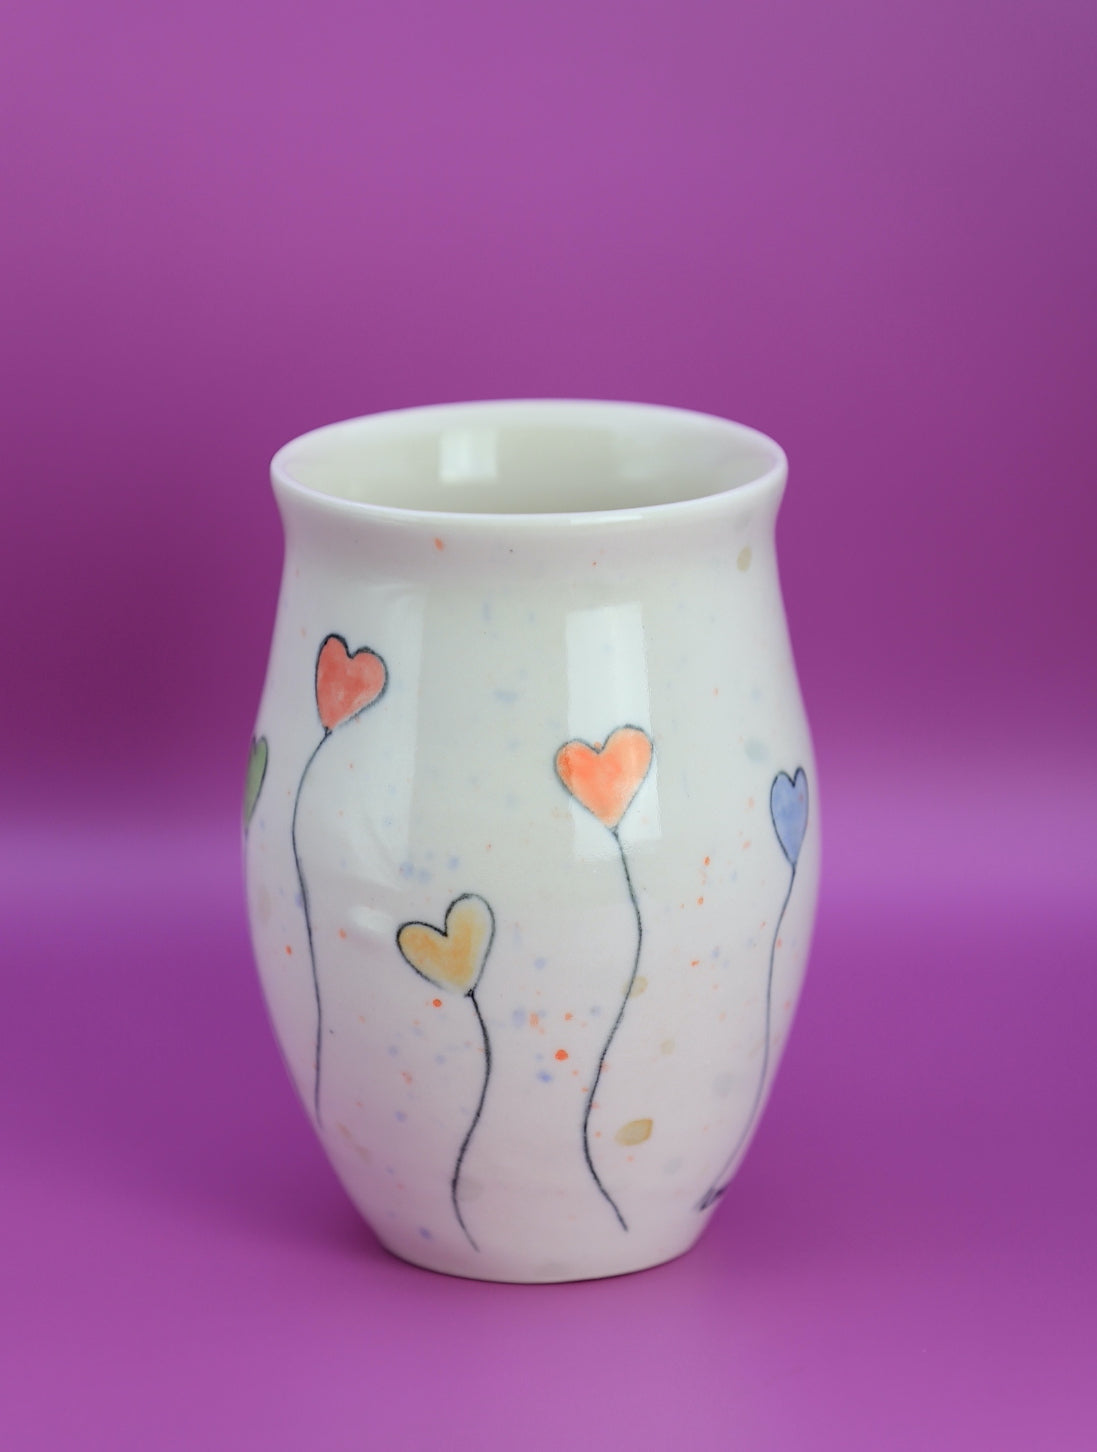 16 oz large porcelain mug with hand painted heart balloons